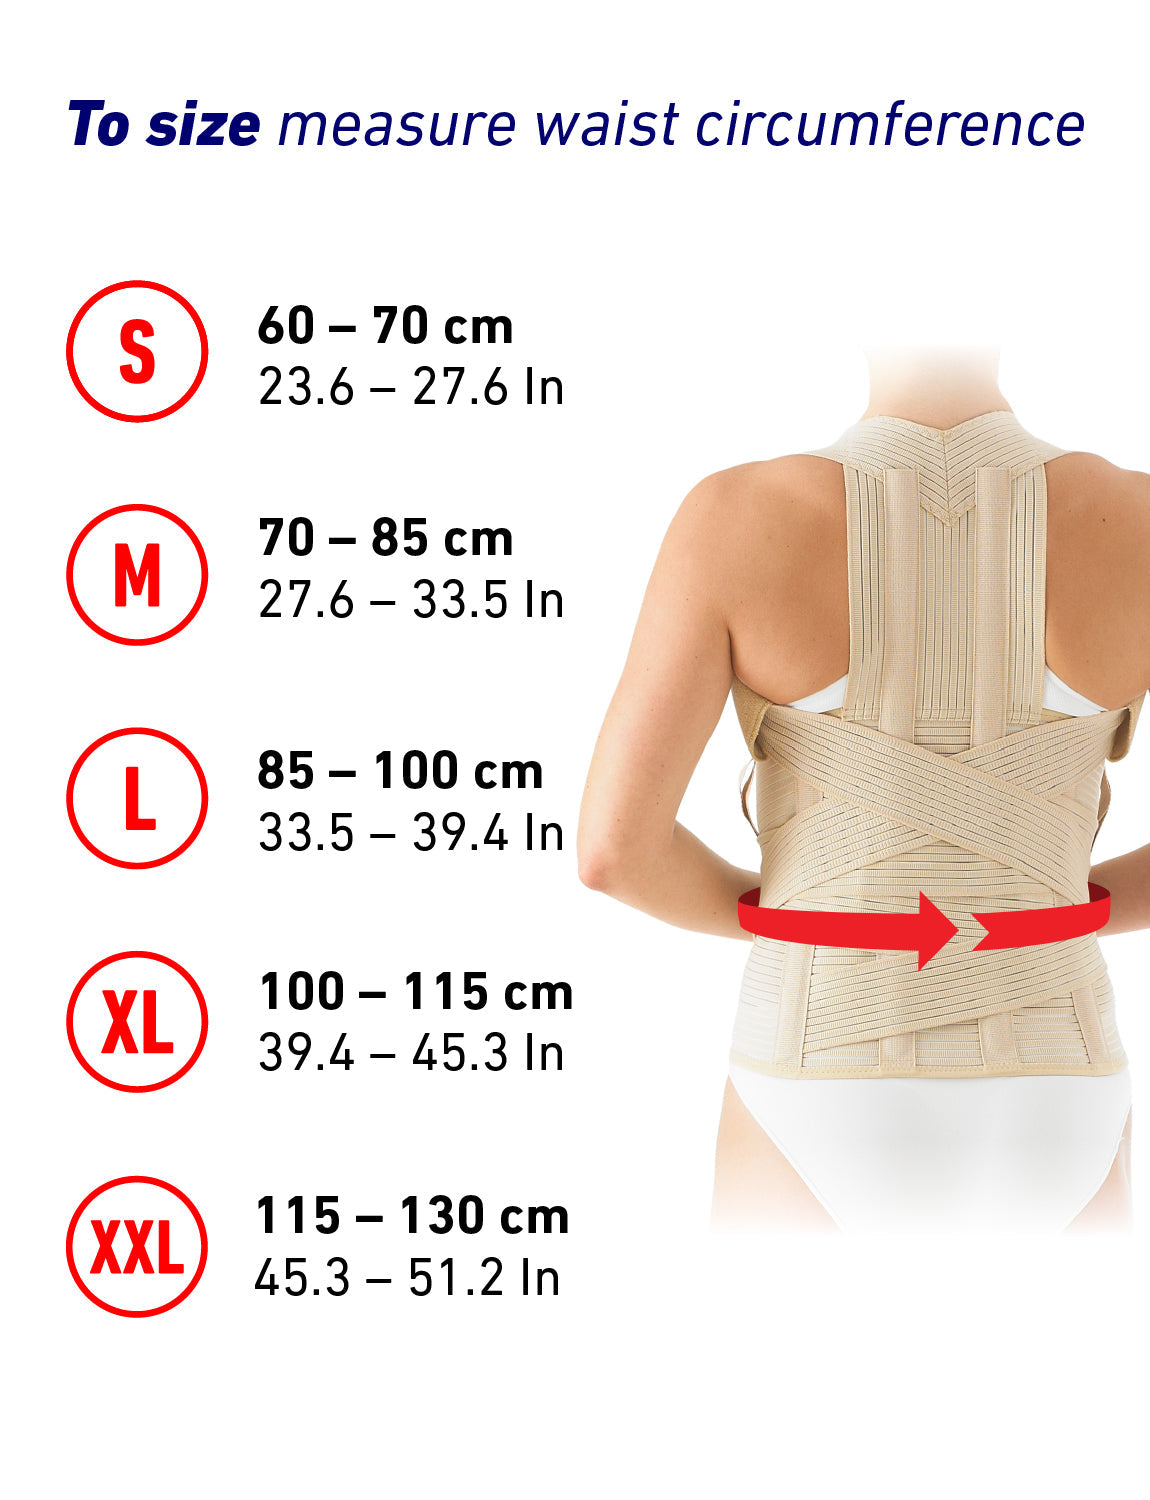 Buy Dorsolumbar Braces for Lower, Middle and Upper Back Support